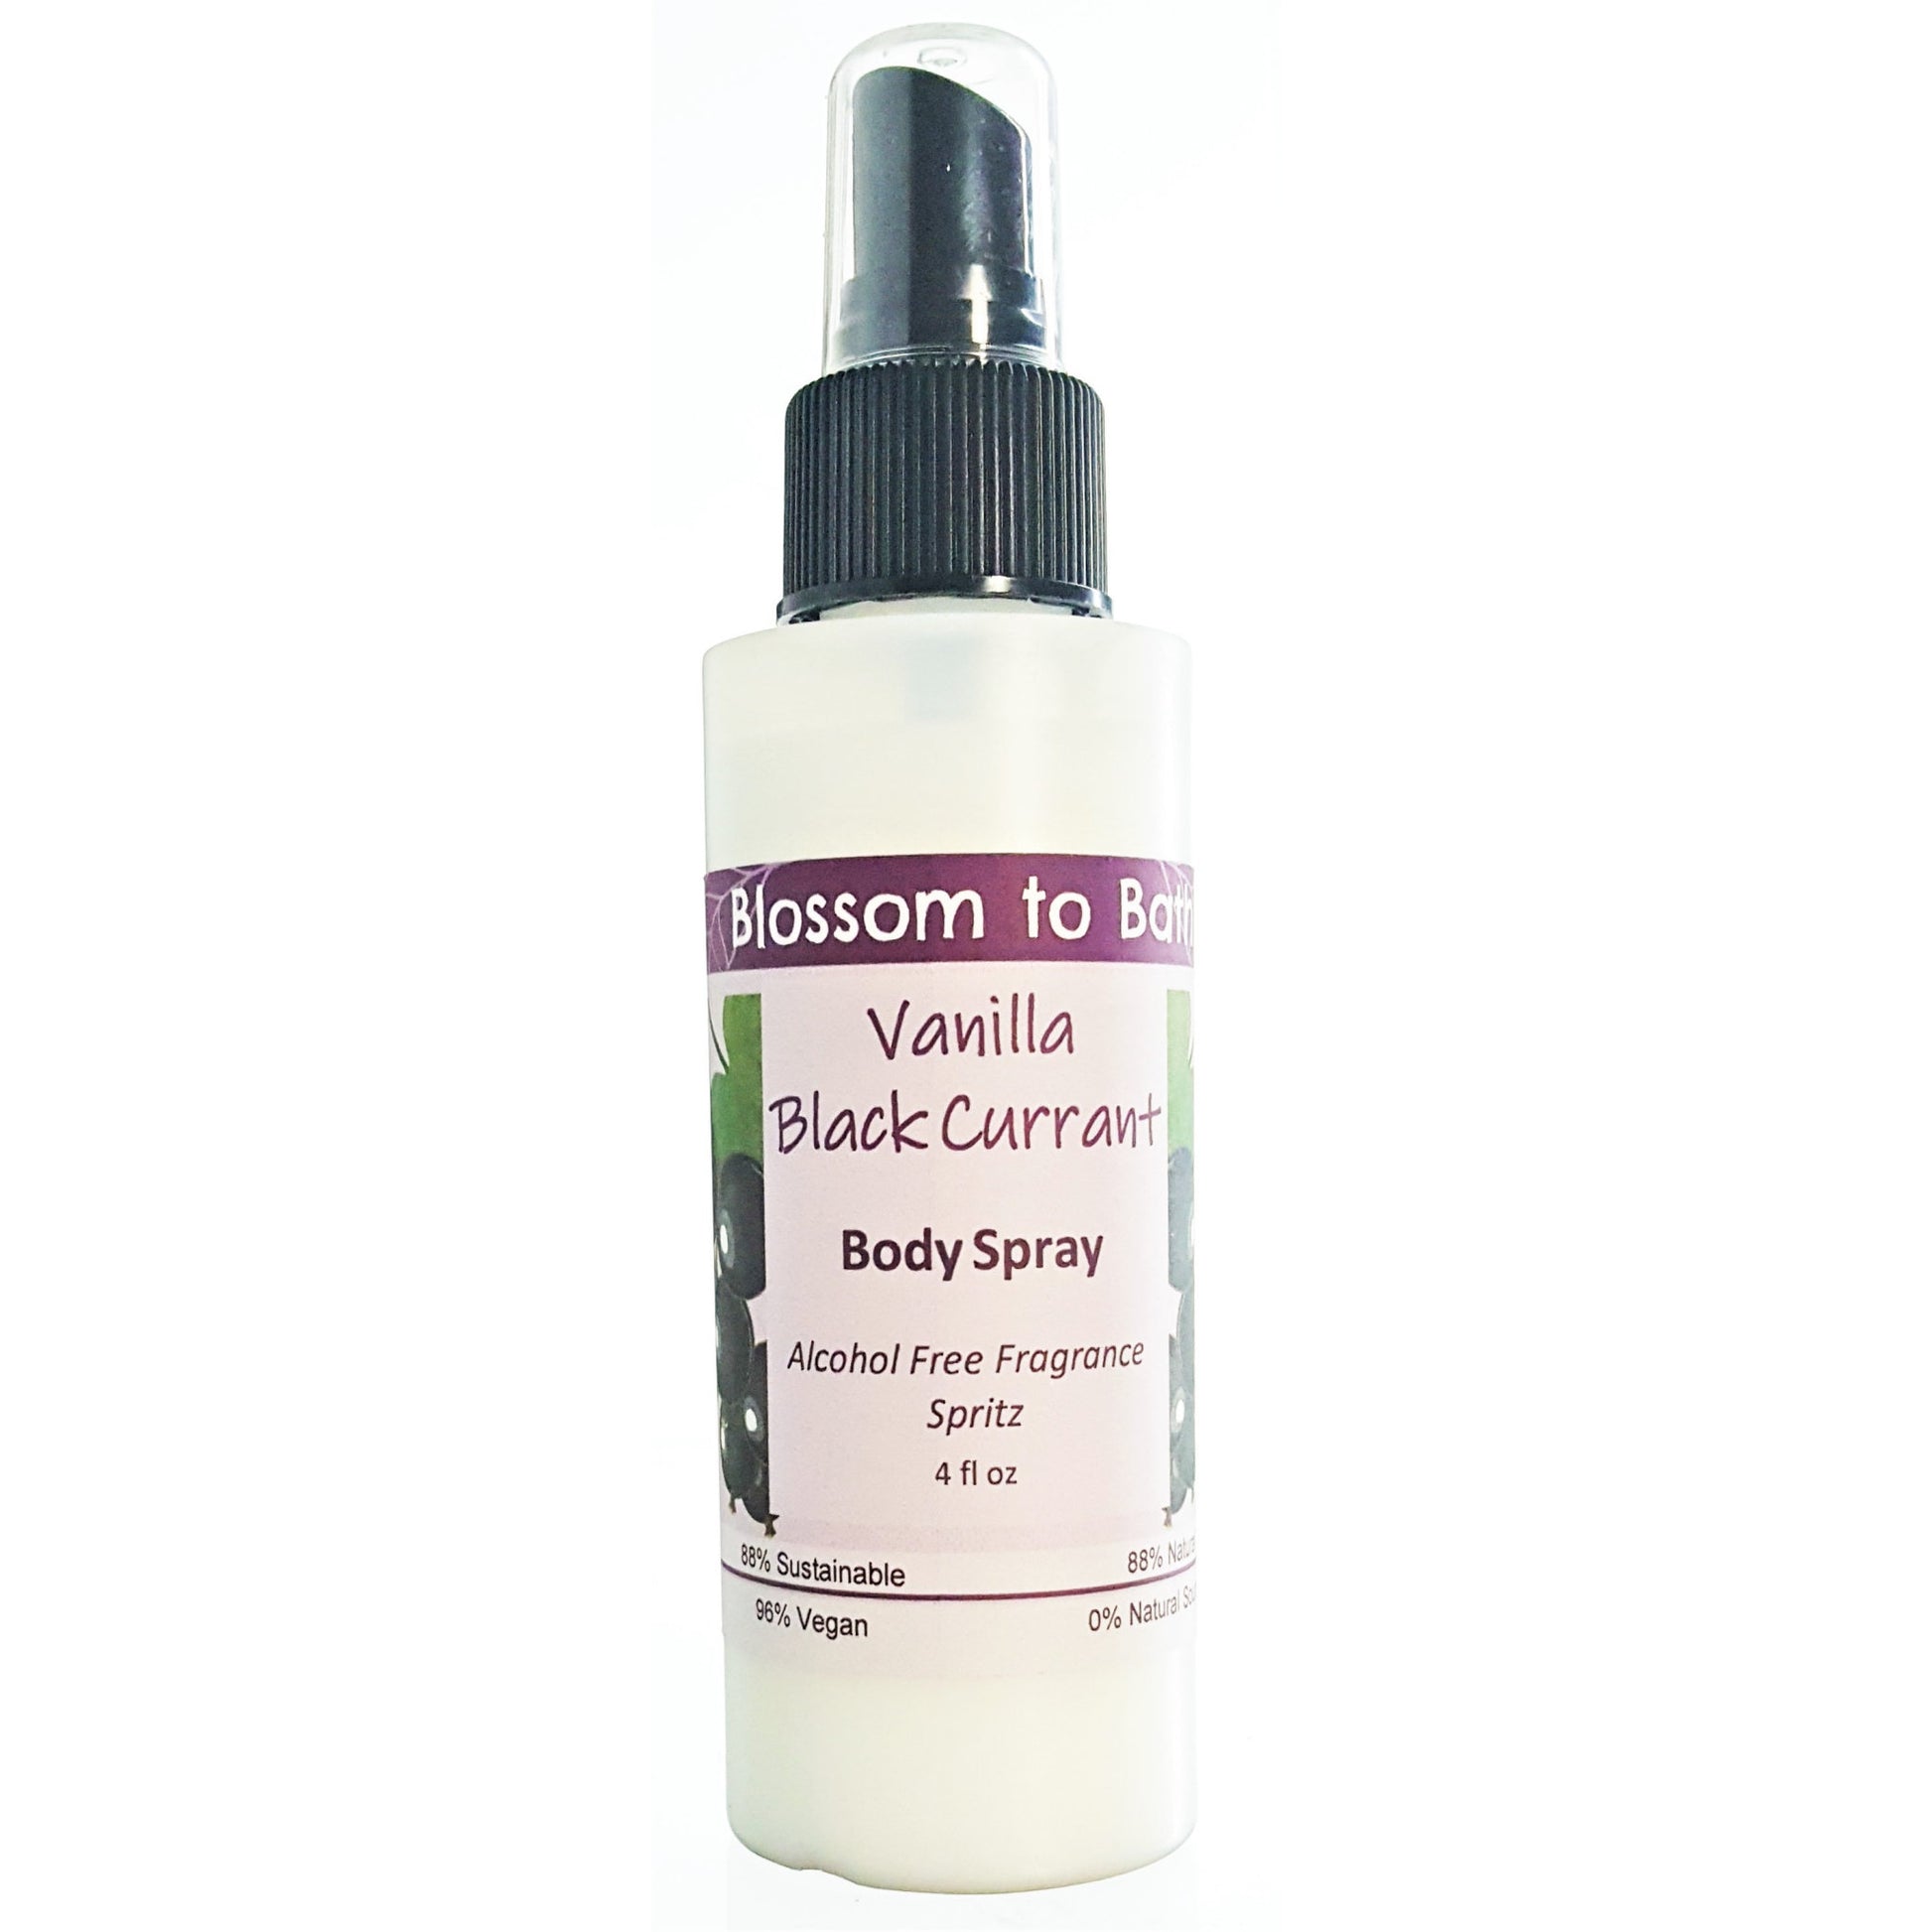 Buy Blossom to Bath Vanilla Black Currant Body Spray from Flowersong Soap Studio.  Natural luxury freshening of skin, linens, or air  A sensuous rich berry scent with a hint of vanilla and a twist of freshness.